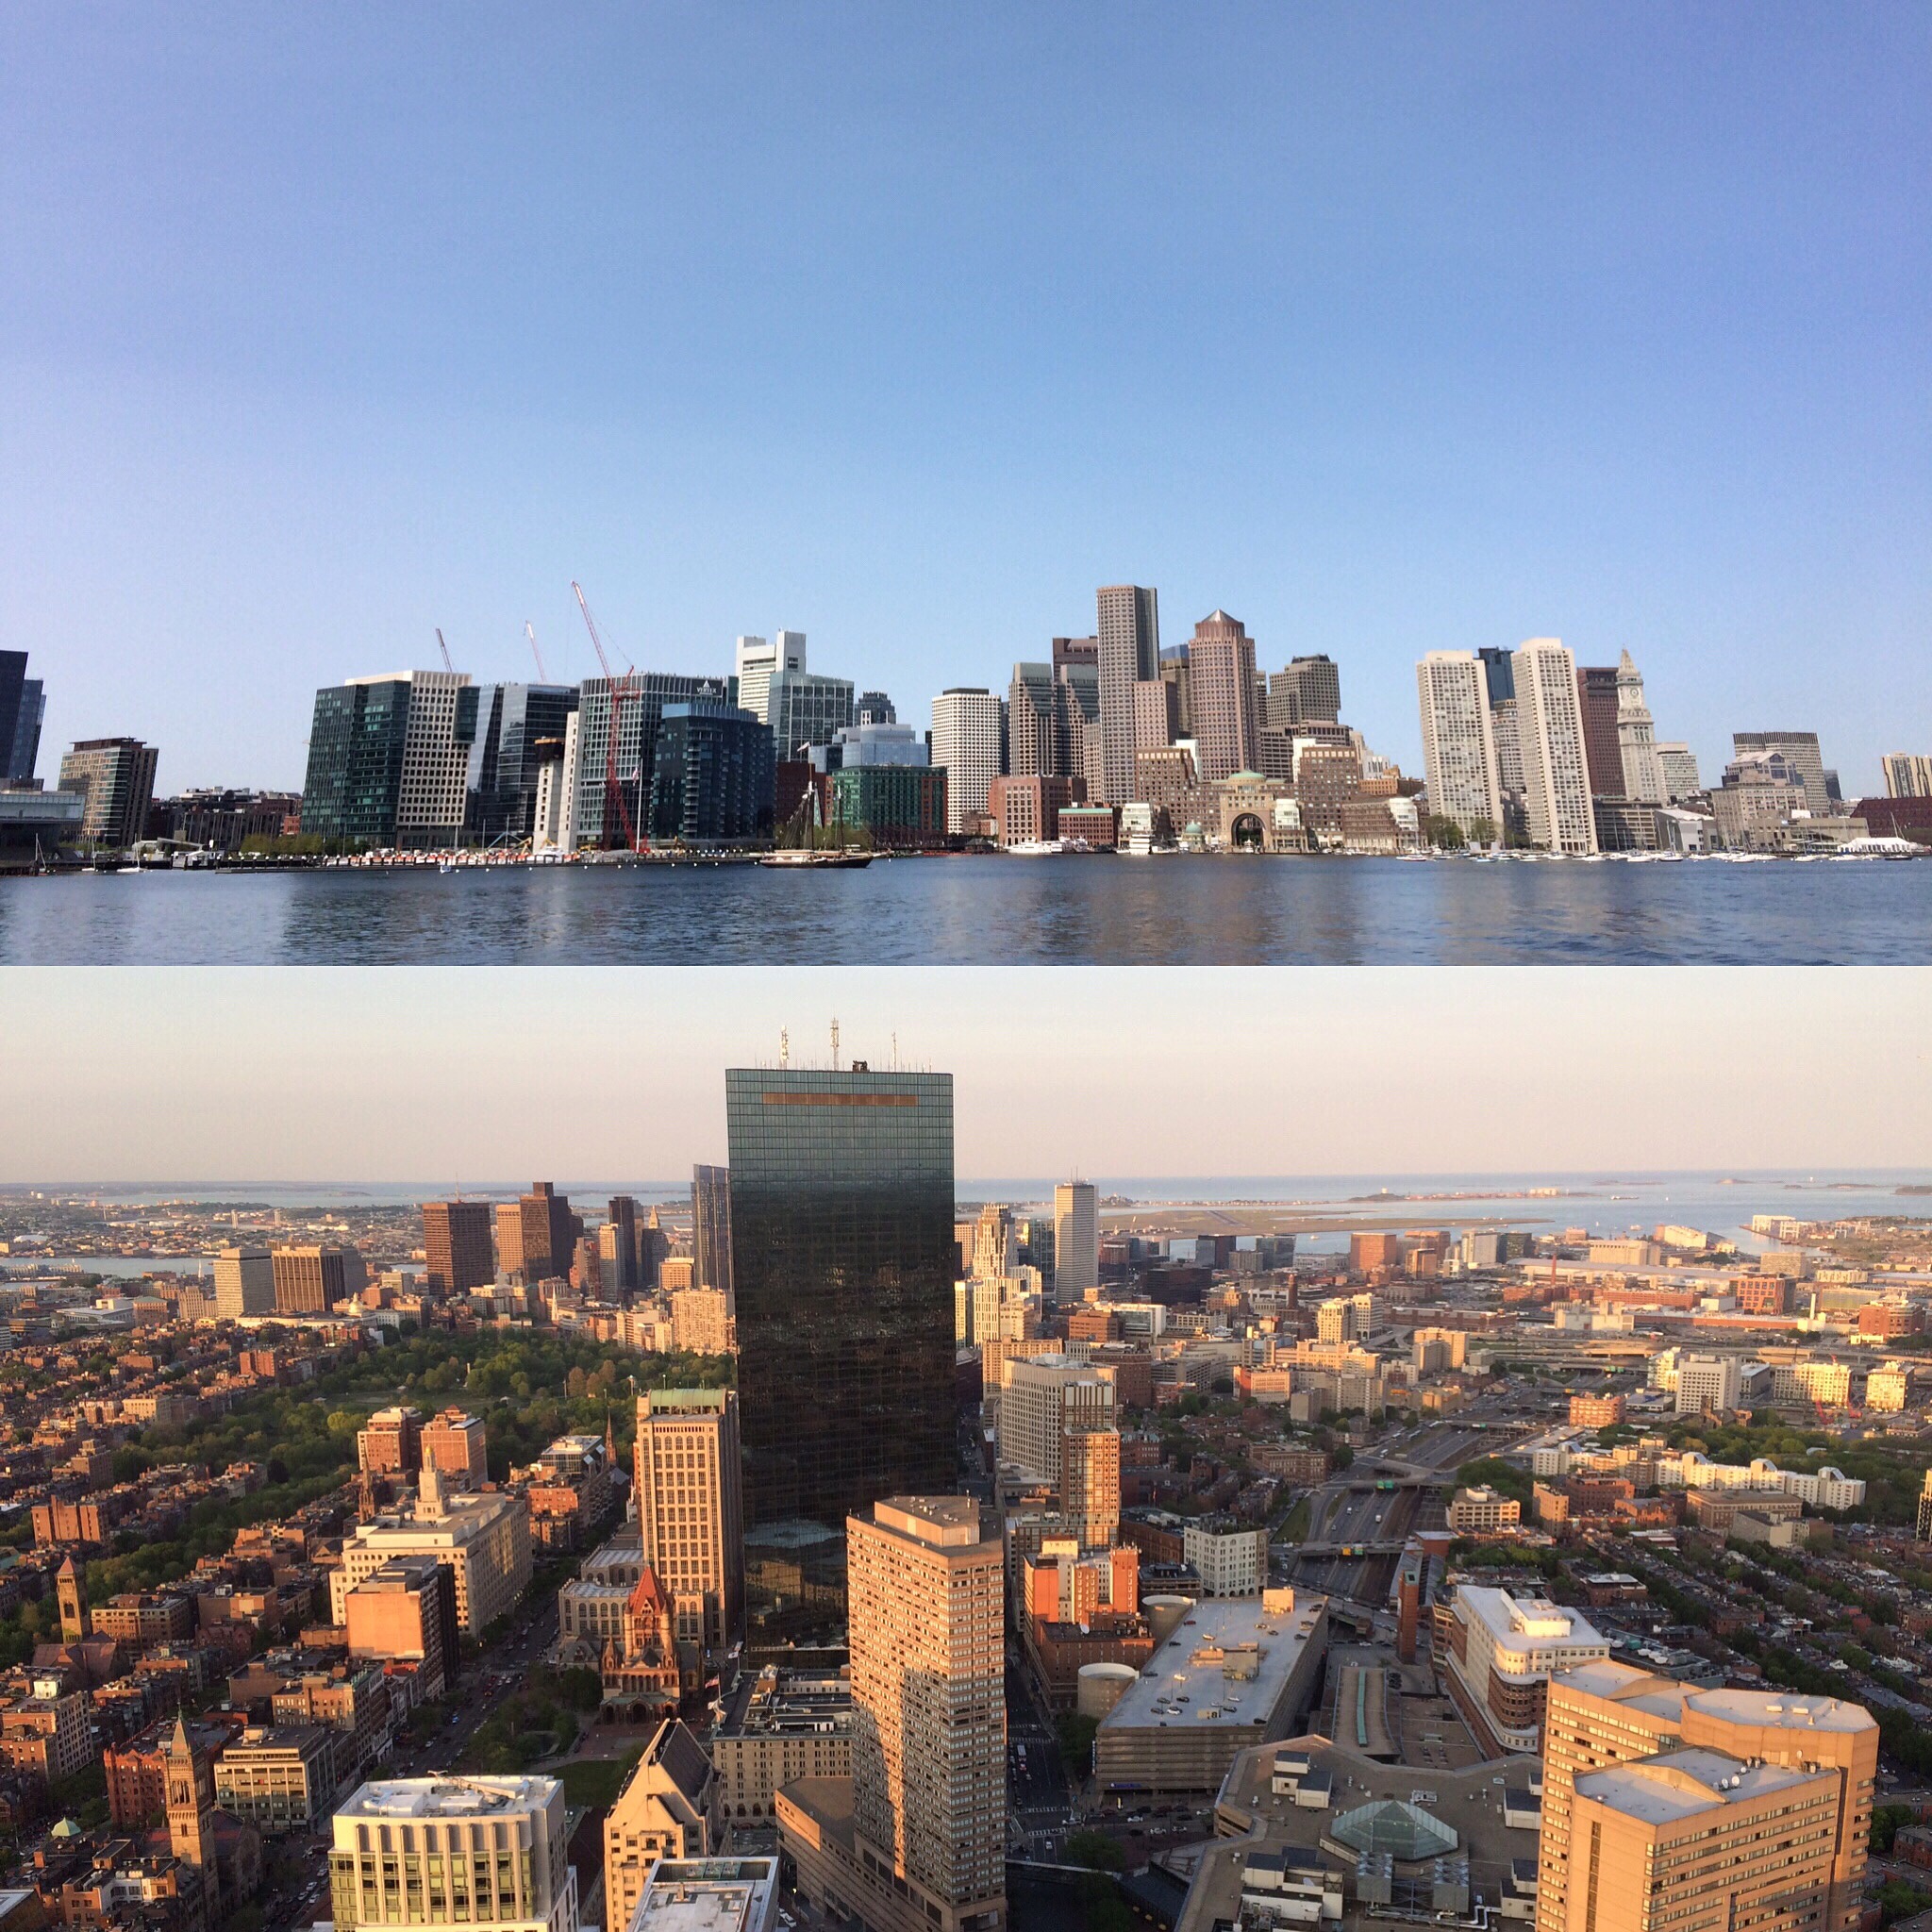 Views of the Boston Skyline from the Whale Watching Boat (top) and the Prudential Center (bottom)